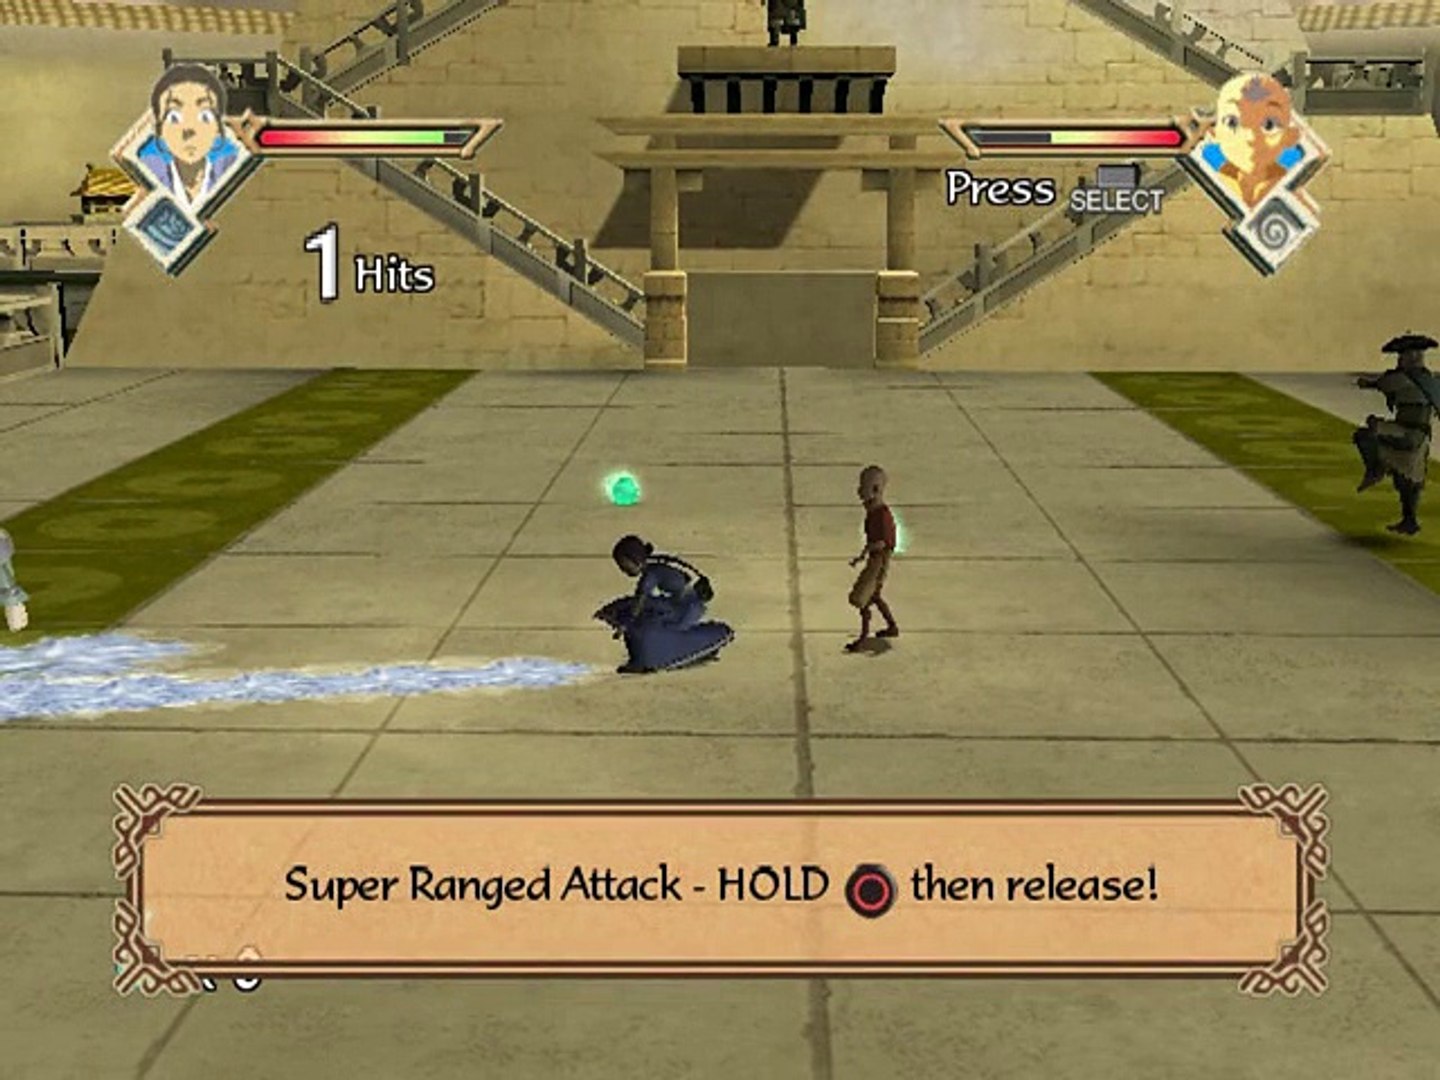 Avatar the Last Airbender : The Burning Earth online multiplayer - ps2 -  Vidéo Dailymotion